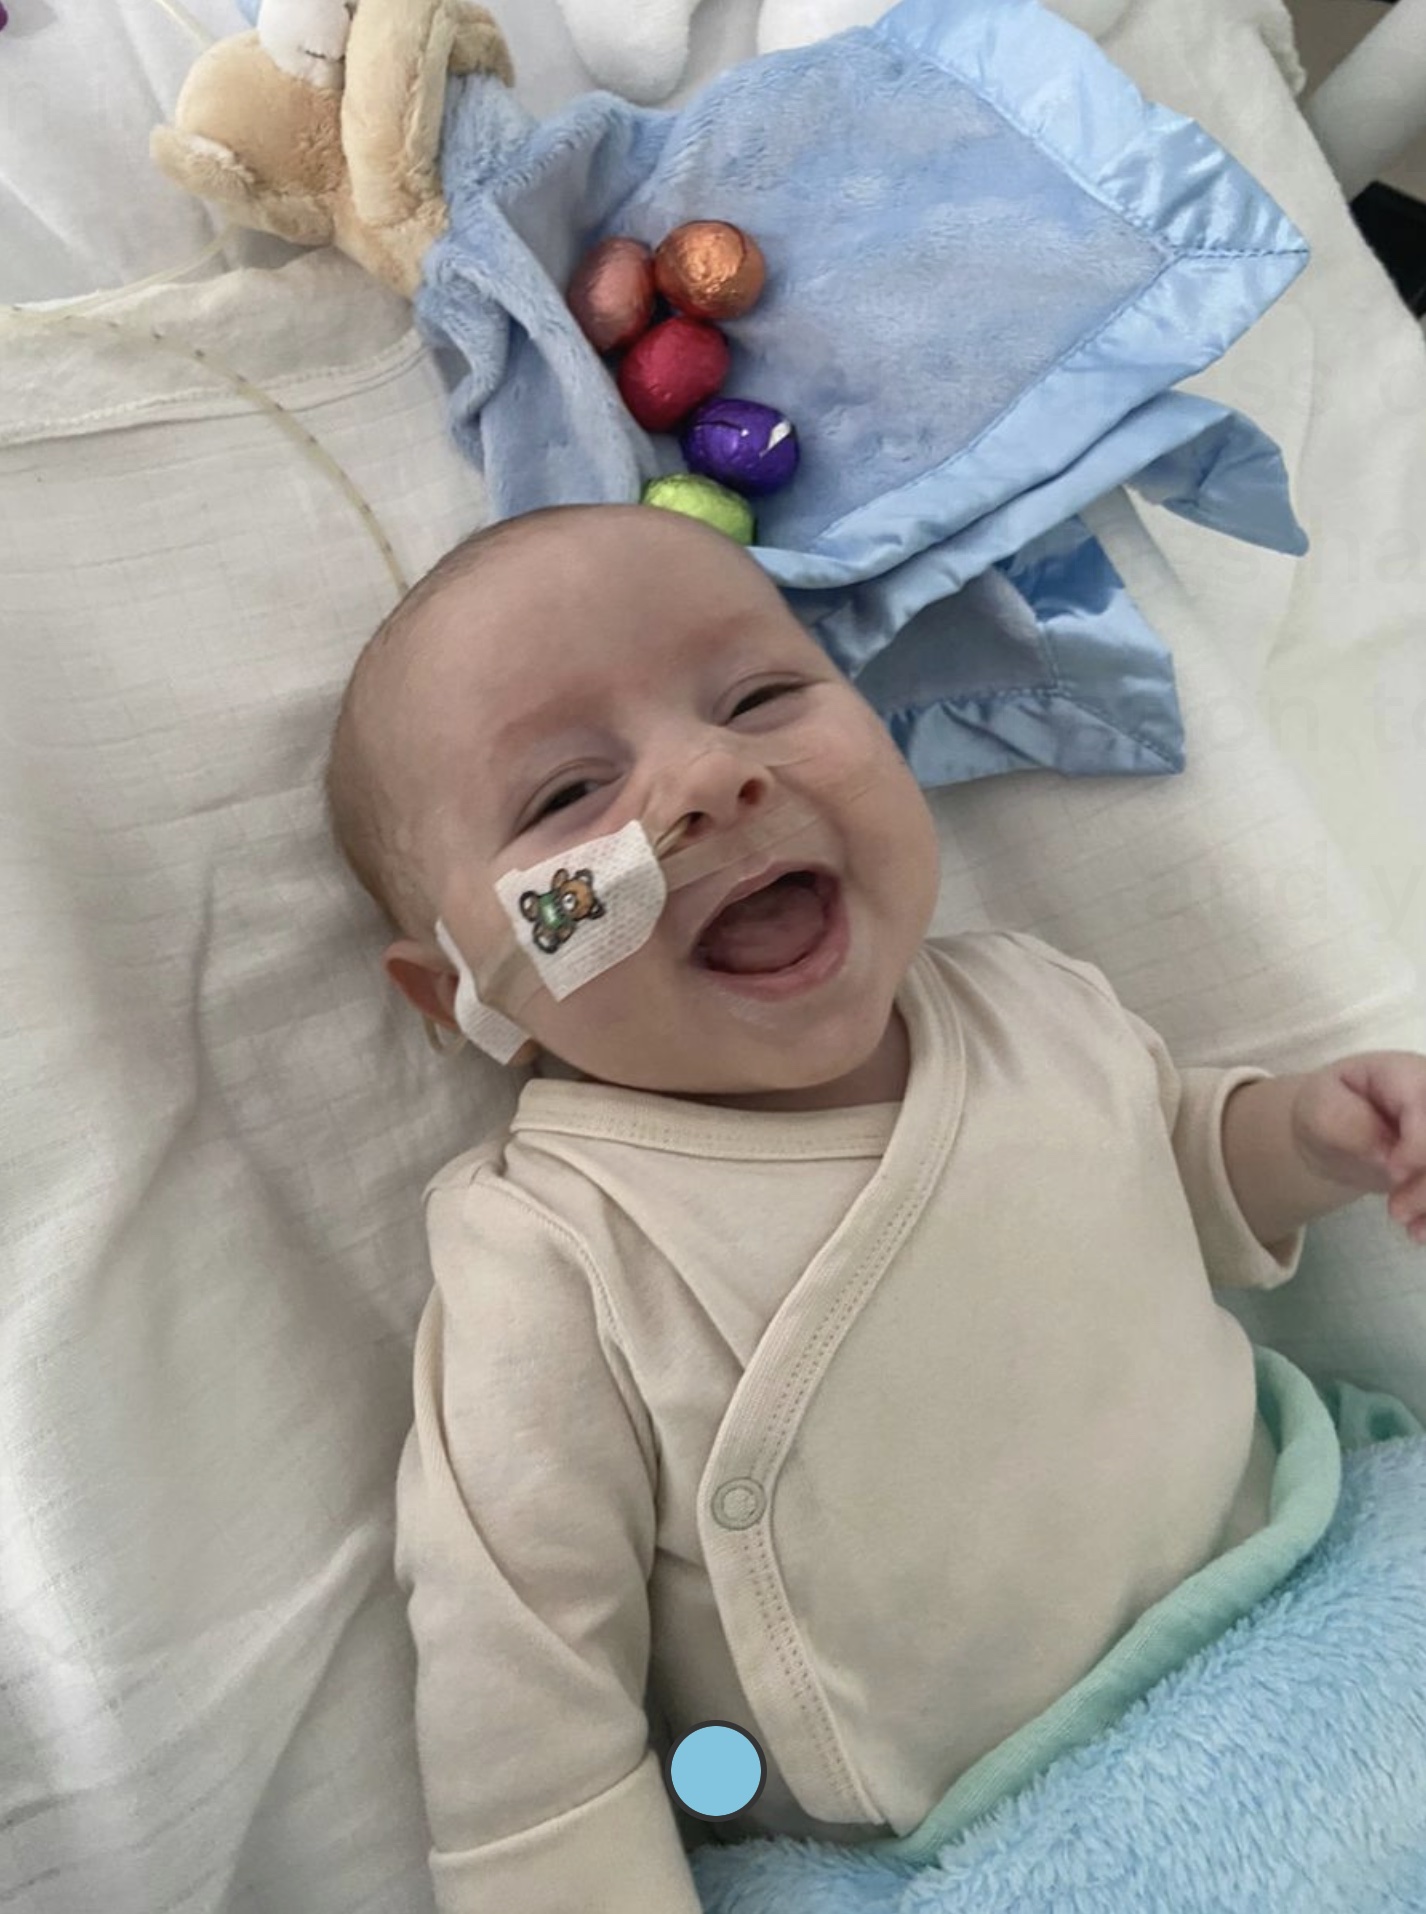 Update: South African Community Unites to Bring Baby Brayden Home